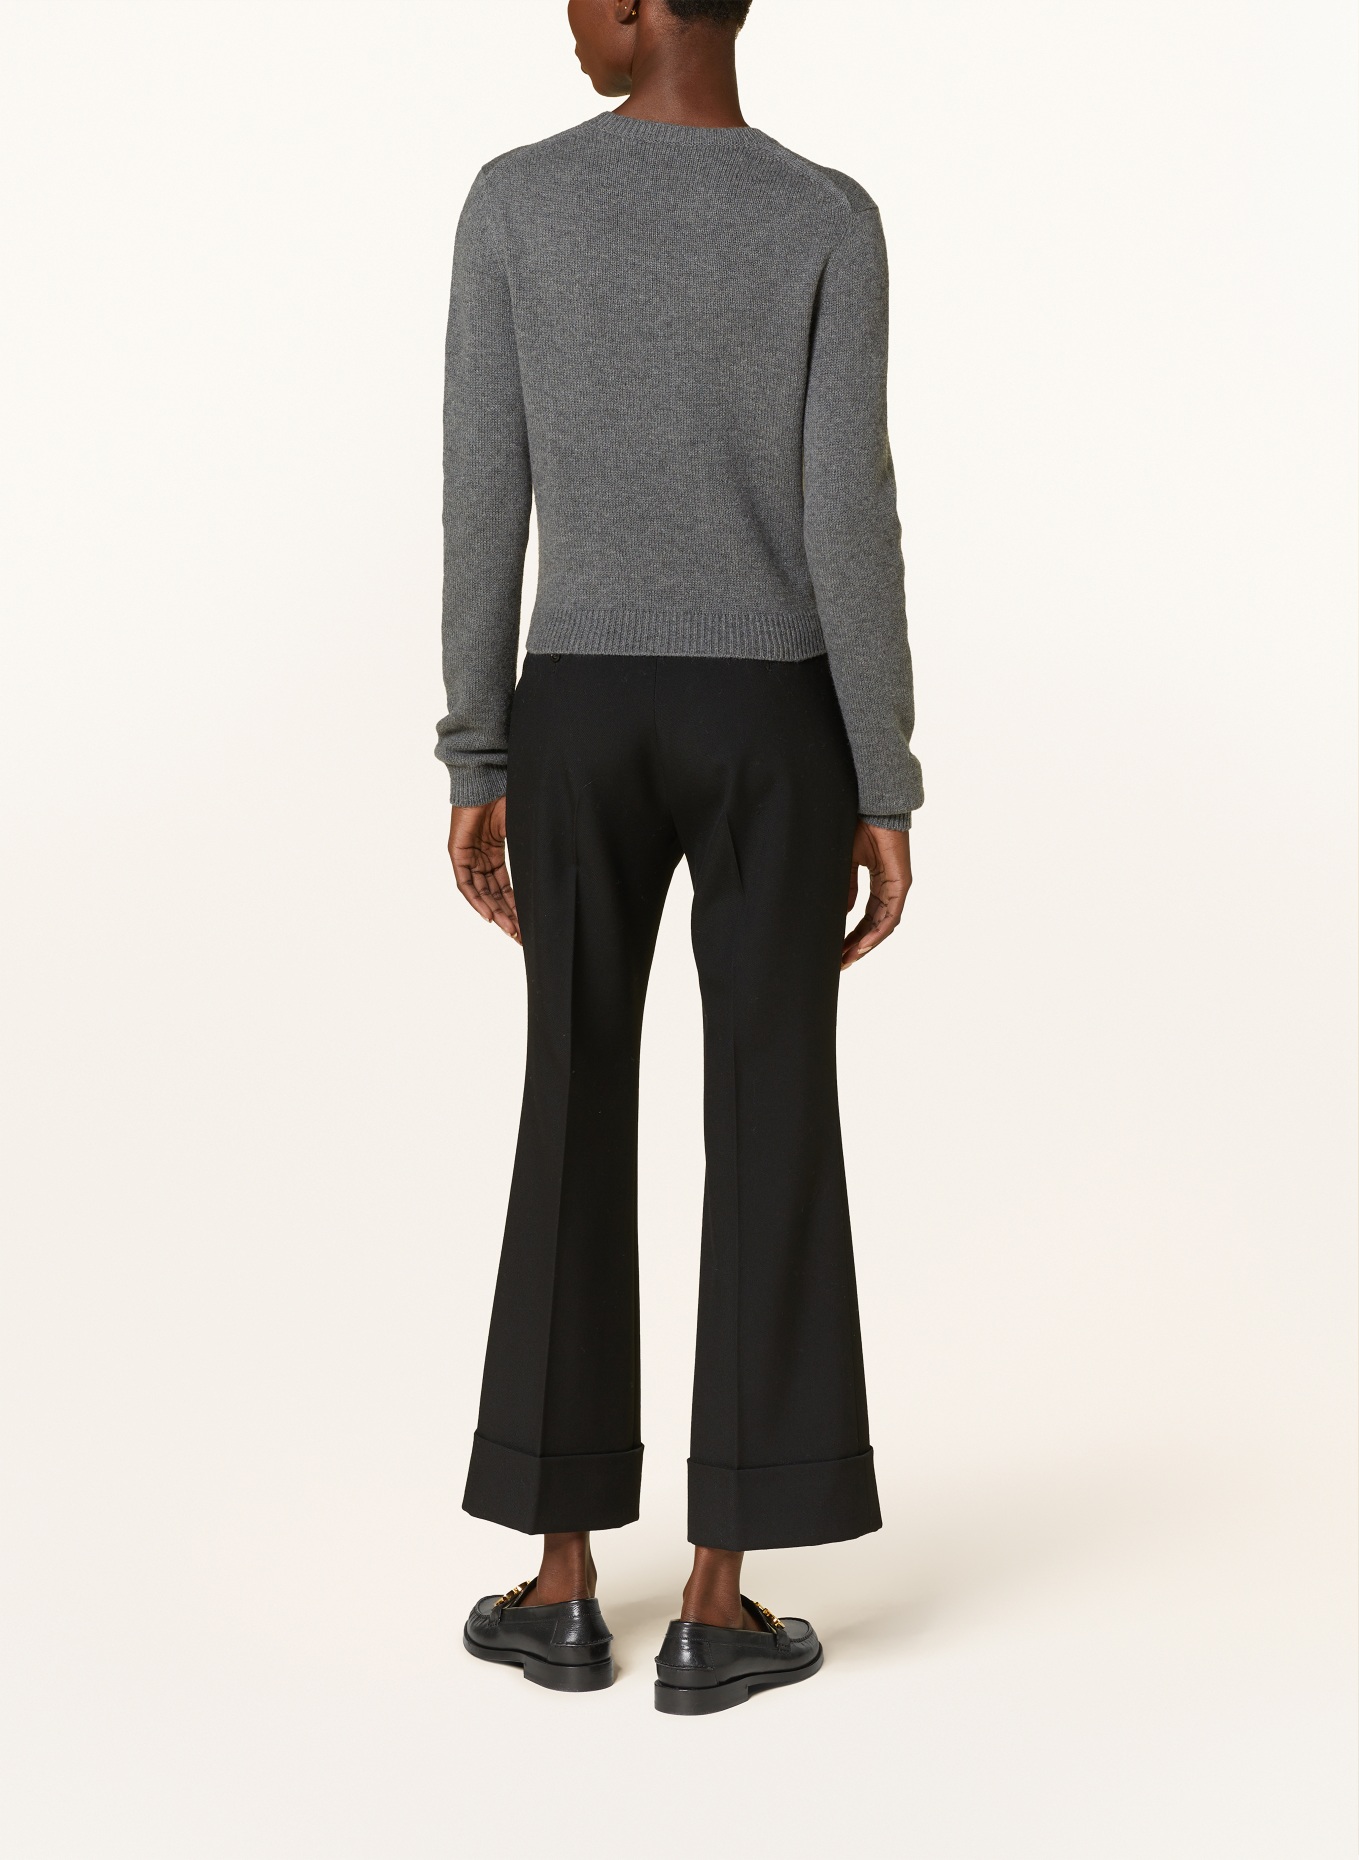 GUCCI Cropped sweater, Color: GRAY (Image 3)